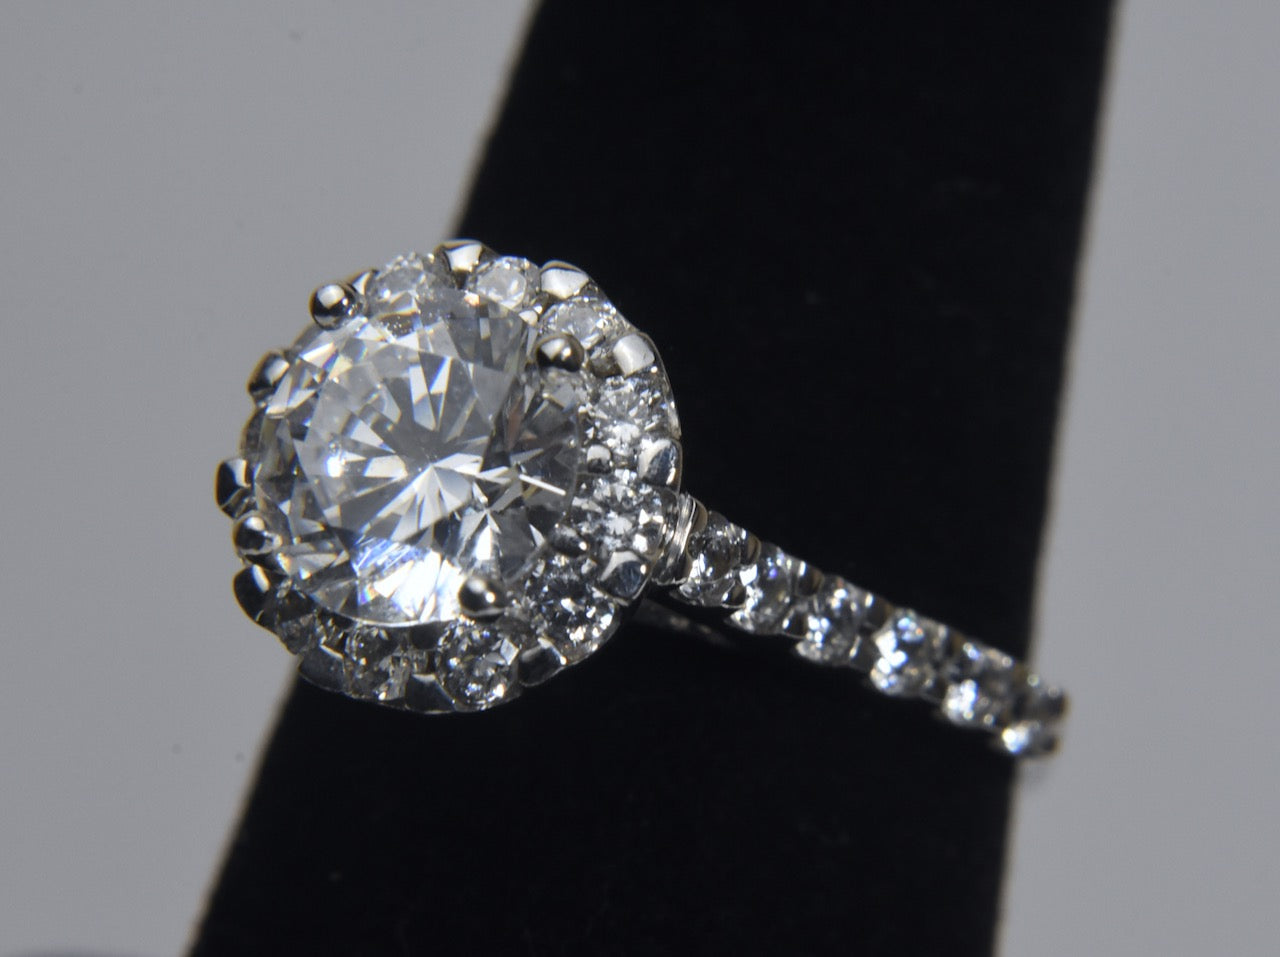 Sterling Silver Cubic Zirconia Stone Halo Ring - Size 7.25